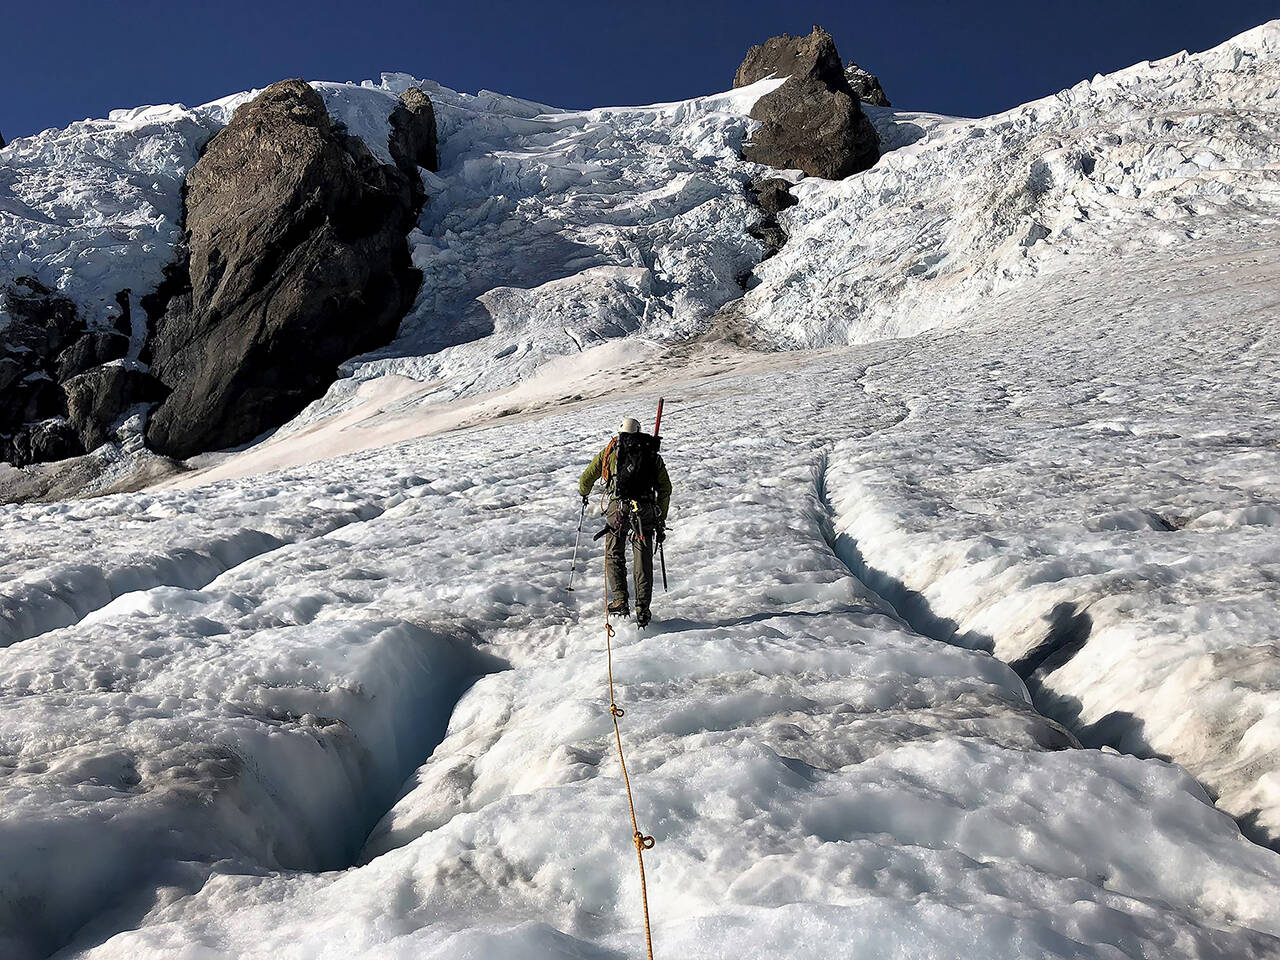 Park scientists take measurements on the Olympic Peninsula’s Blue and Eel Glaciers in 2018. (Olympic National Park)